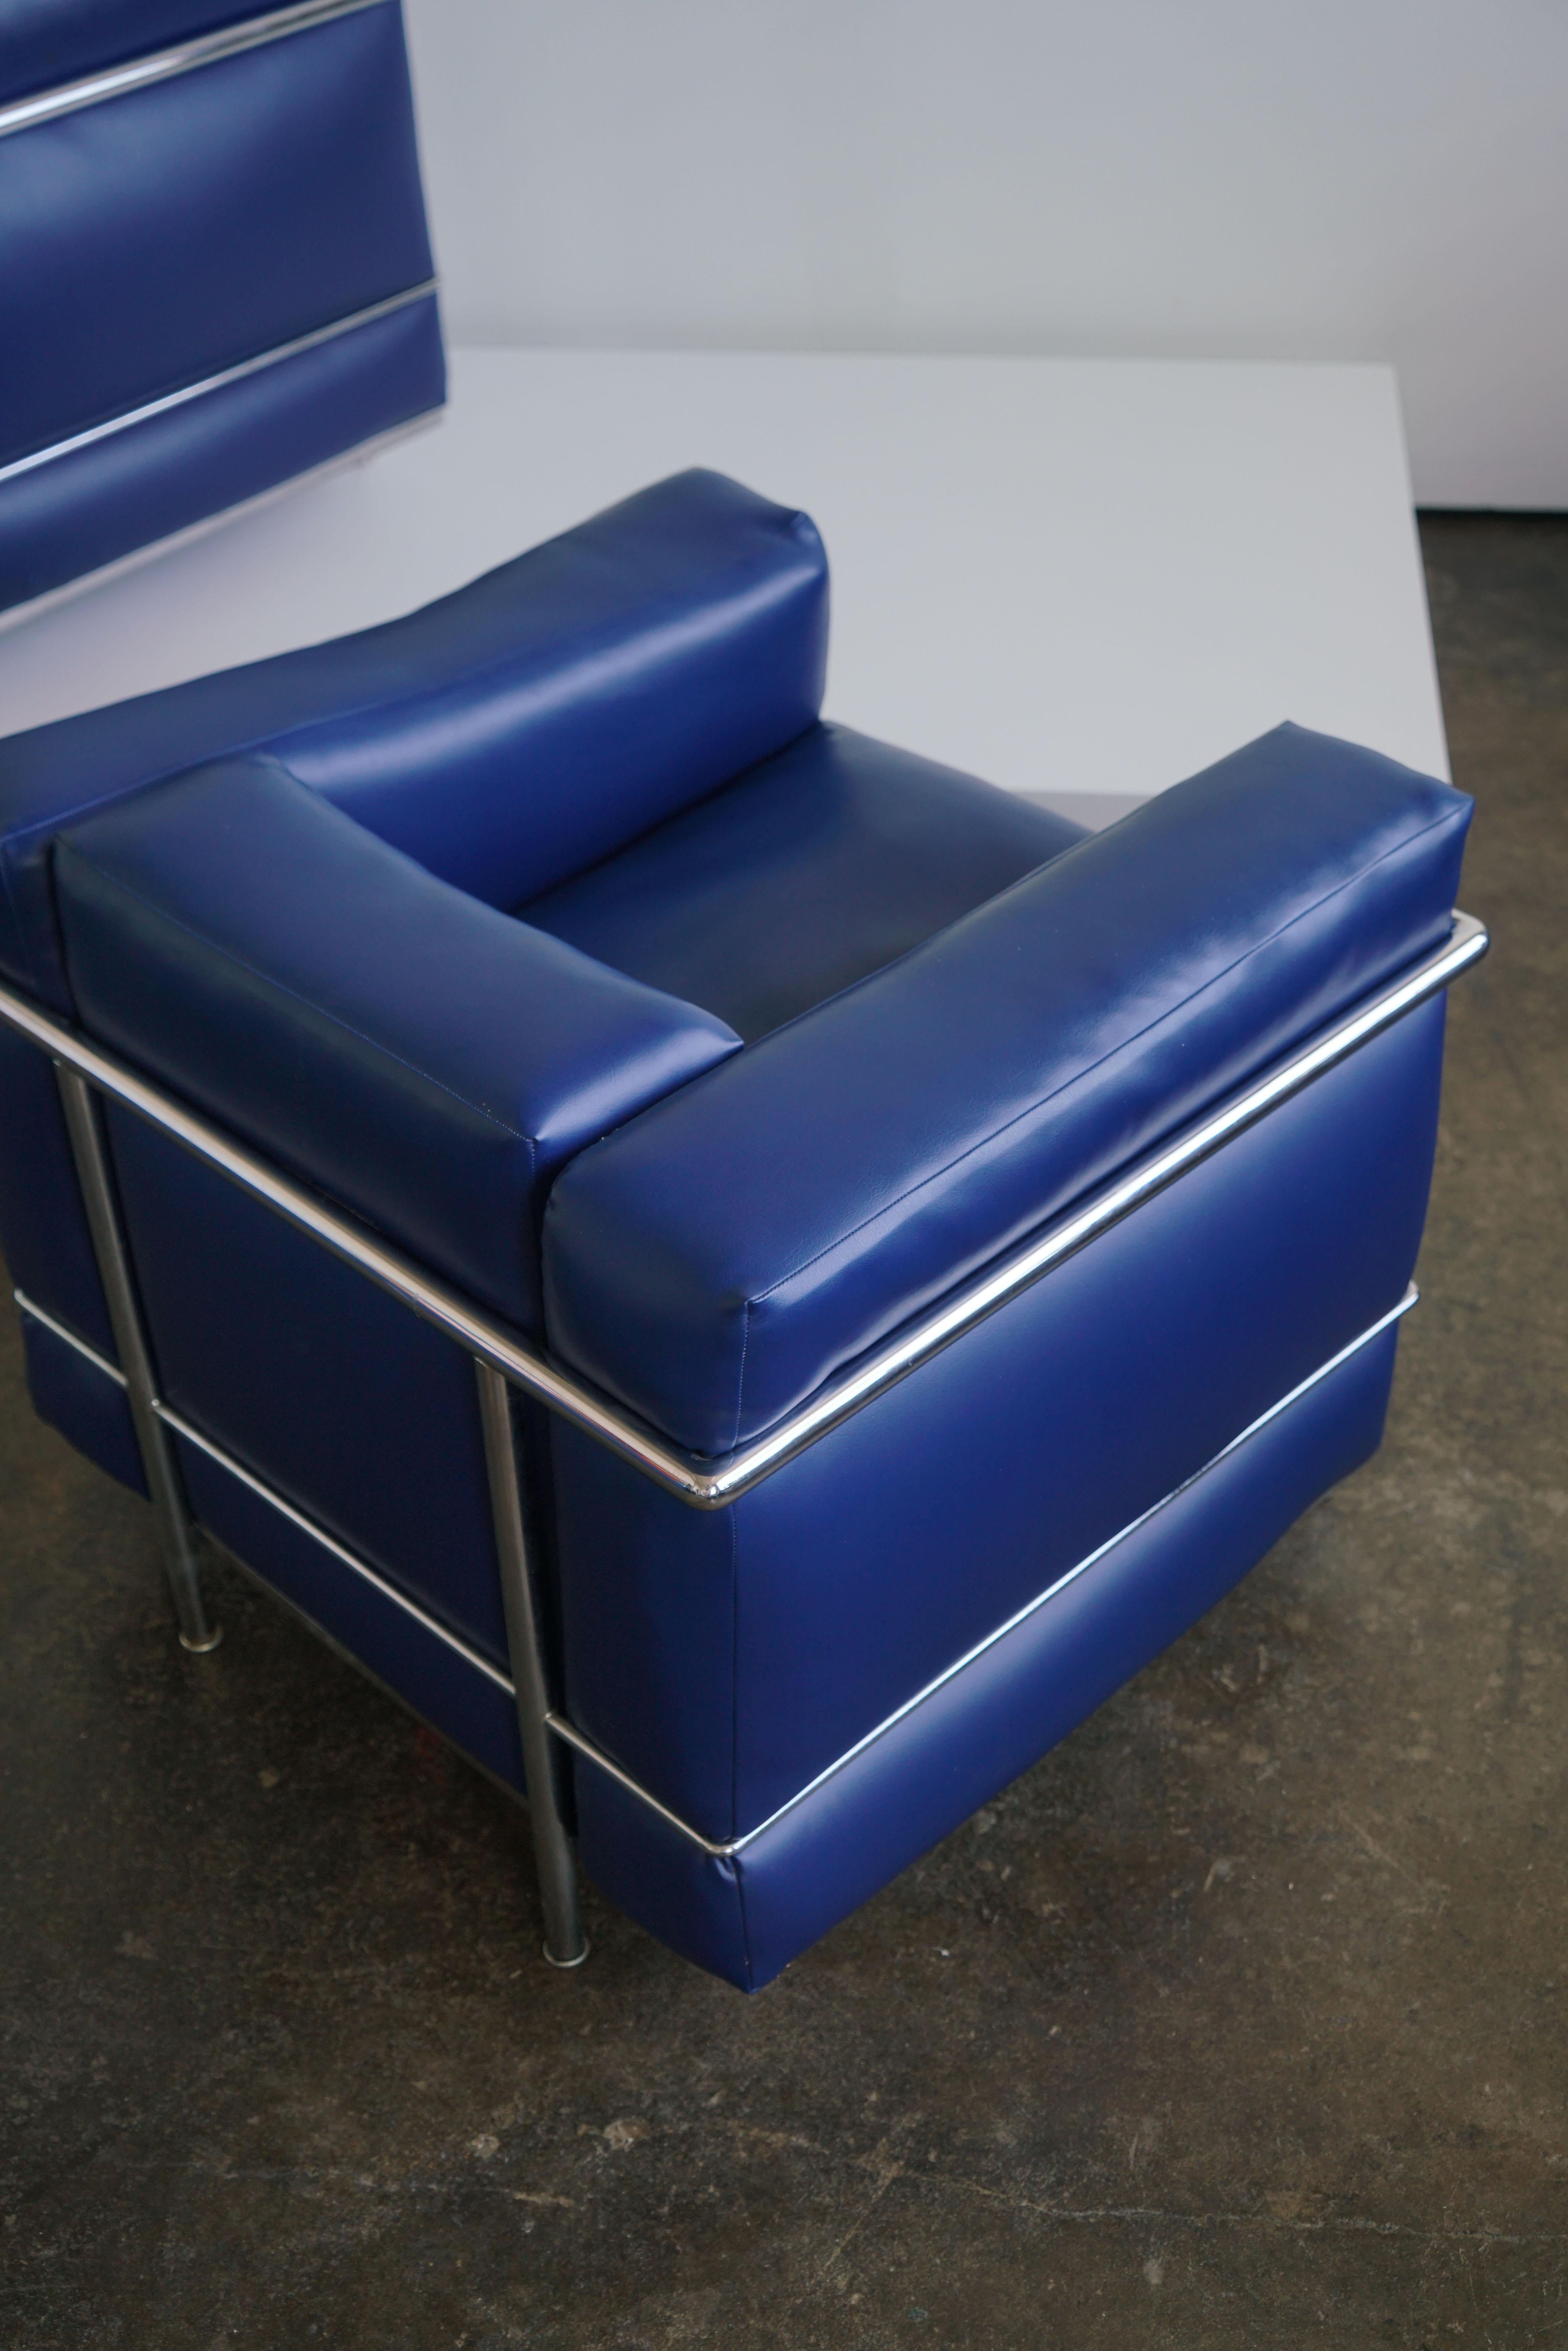 Chrome Pair of Blue Le Corbusier Lc2 Lounge Chairs for Cassina, 1960's, Qty Two